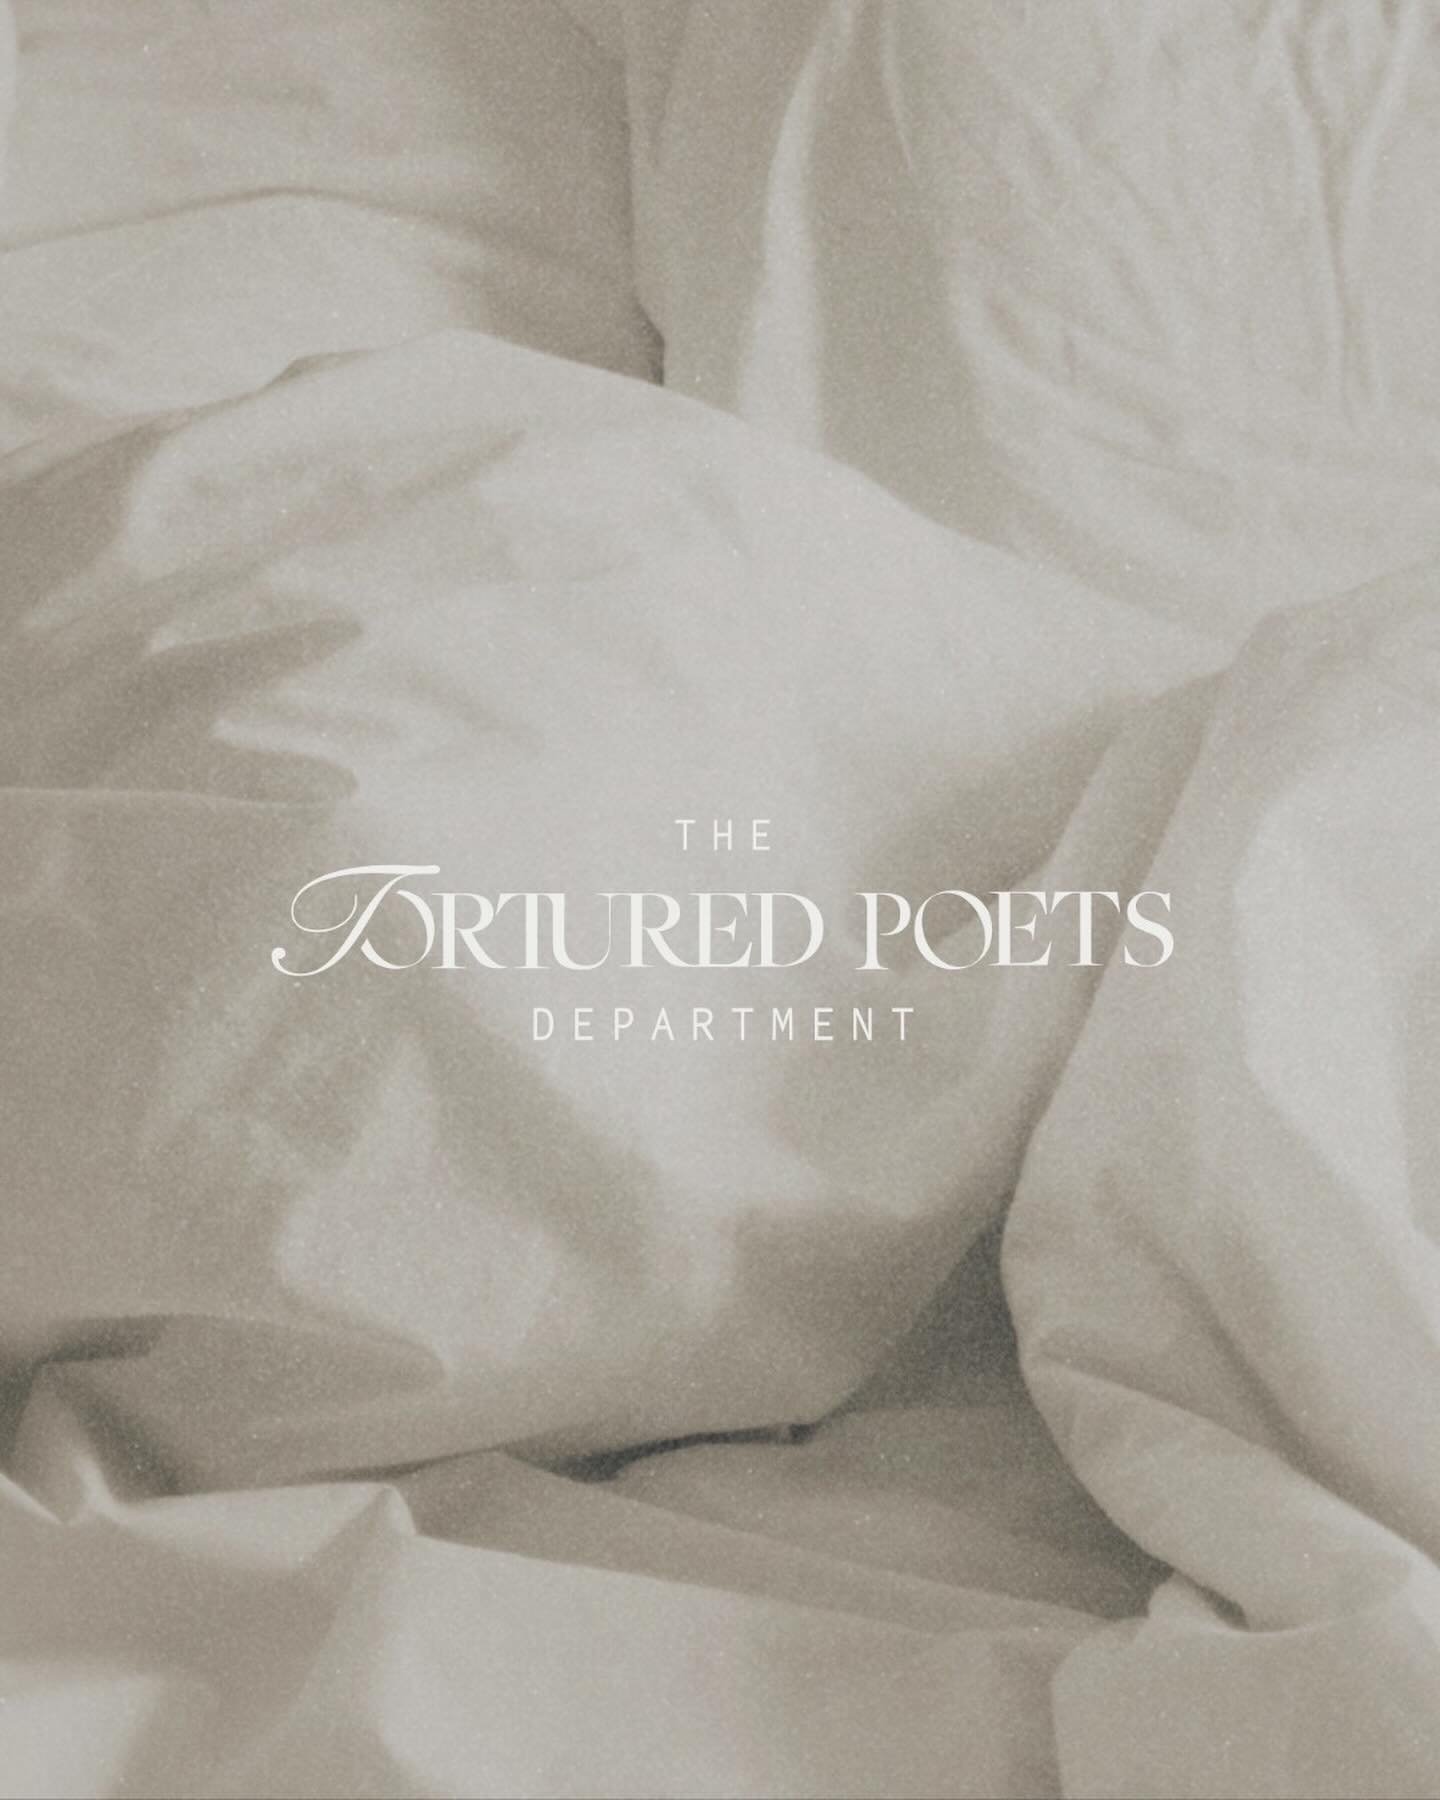 Happy Tortured Poets Department release day to those who celebrate🤍🩶🖤🤎
⠀⠀⠀⠀⠀⠀⠀⠀⠀
In honor of Taylor&rsquo;s album release (actually... two albums?!🤯), we decided to have a little fun and imagine what the rest of the brand suite could look like f